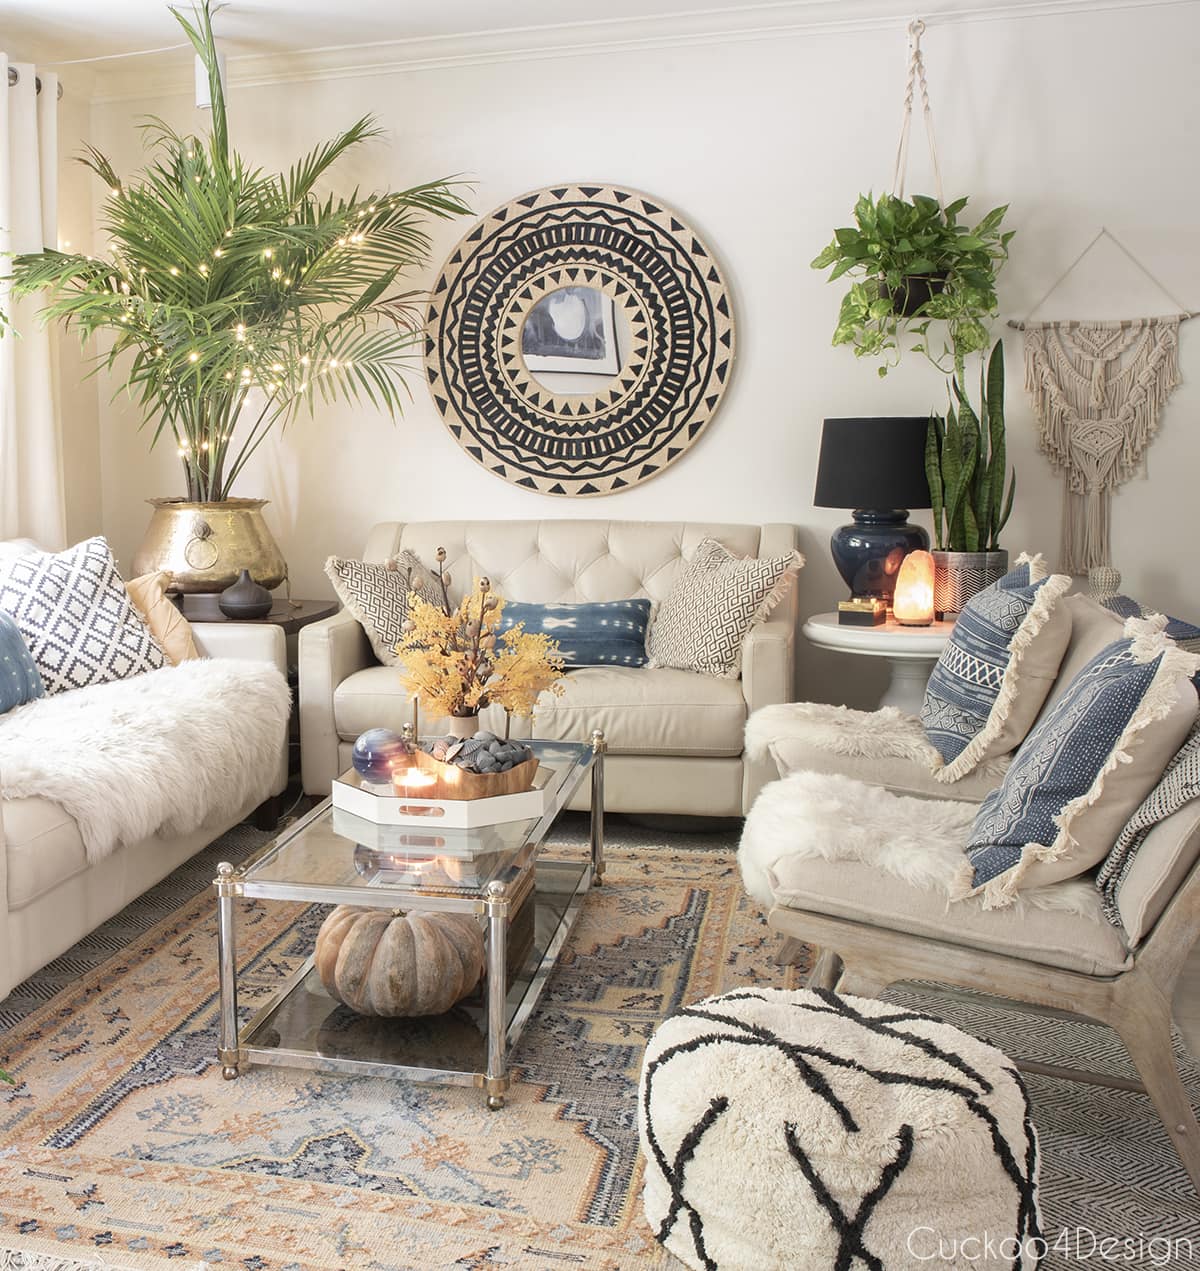 Decorating for fall with area rugs